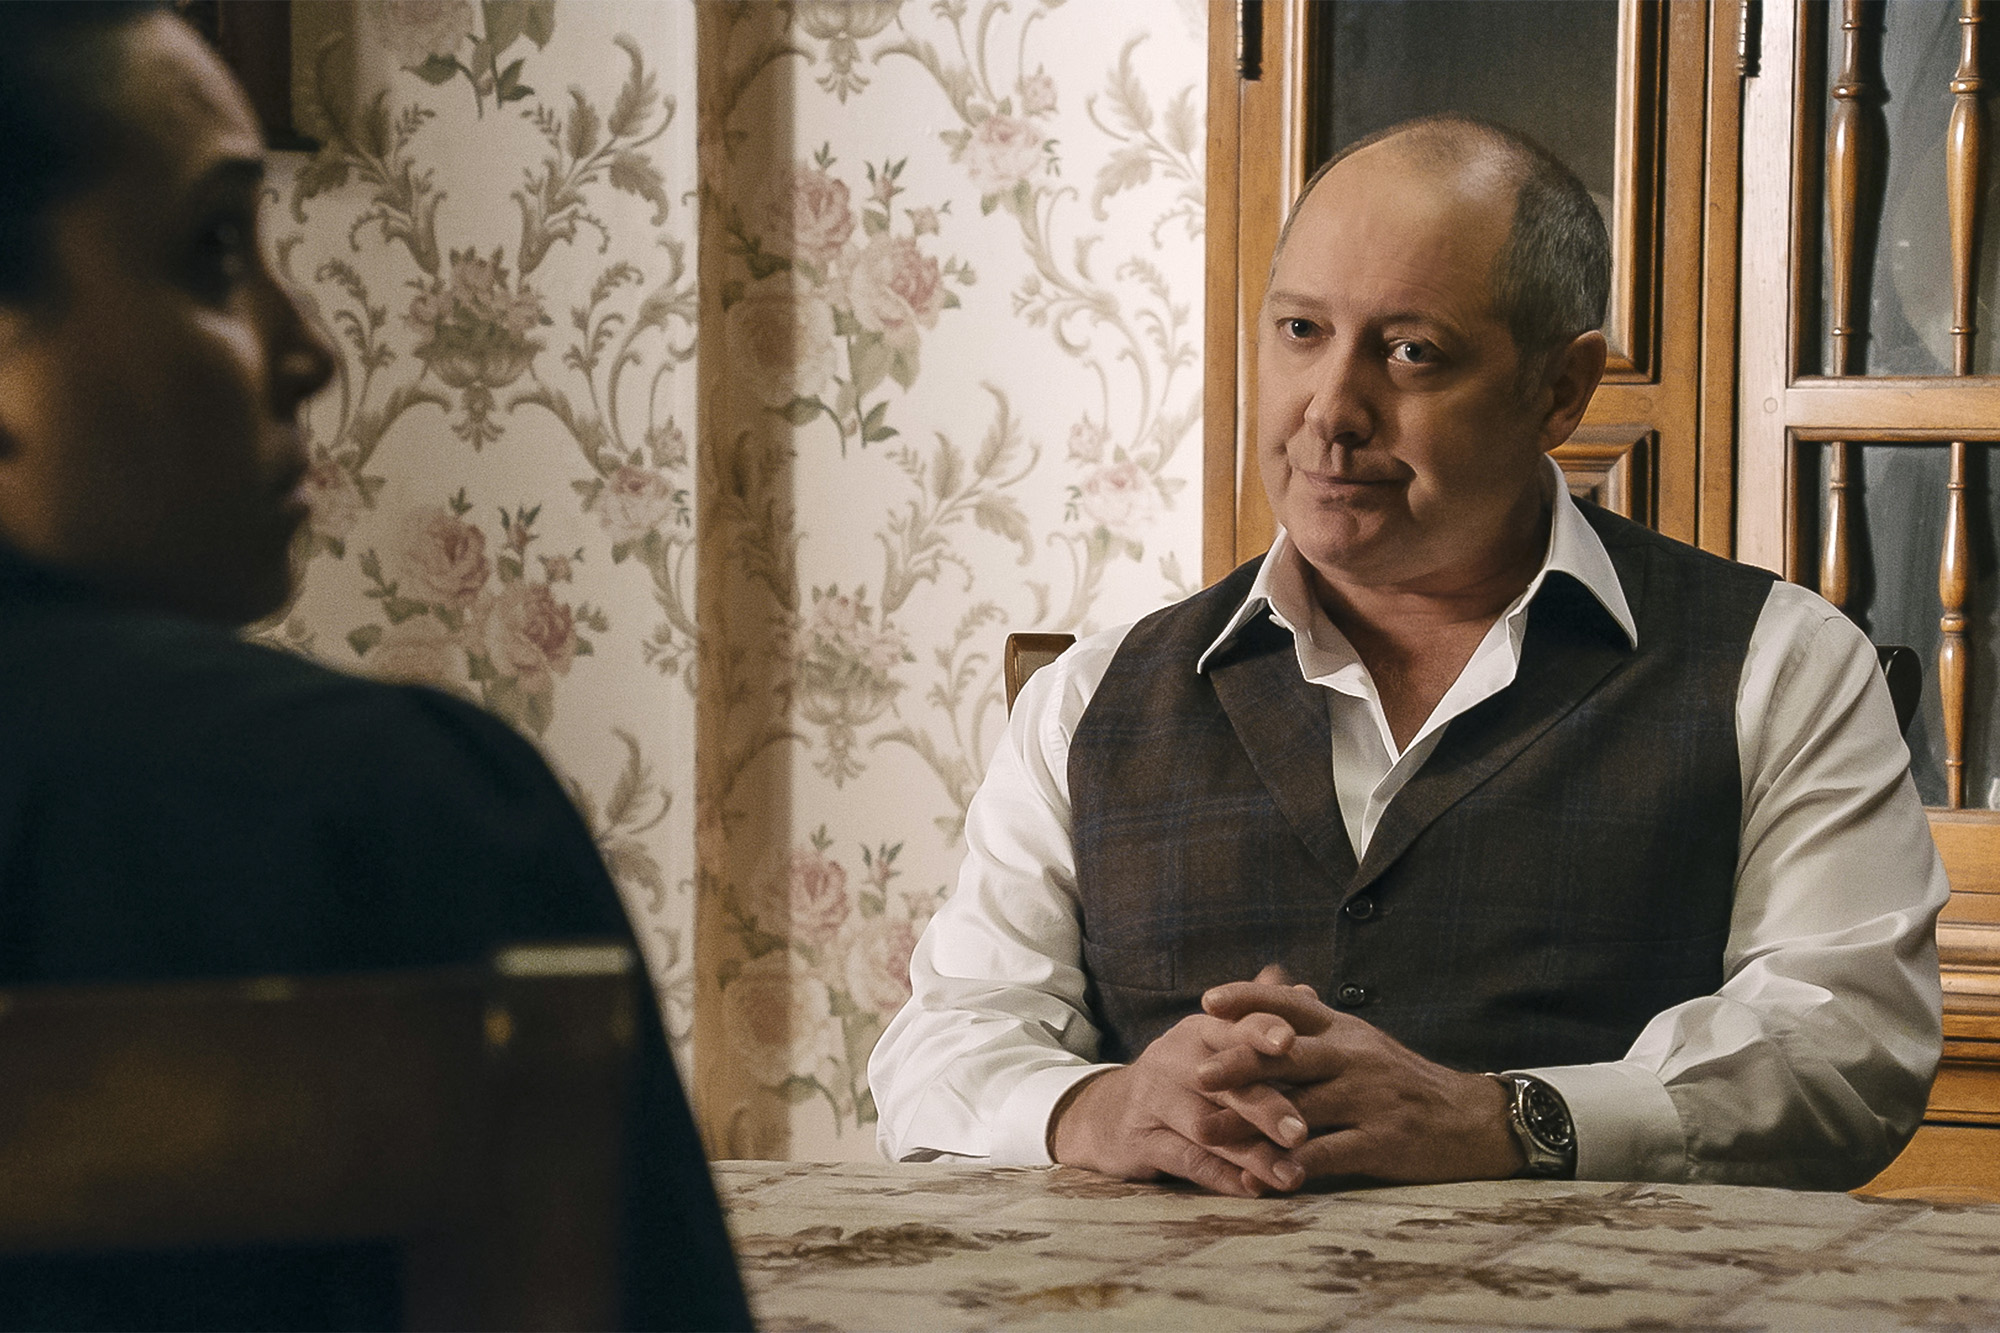 THE BLACKLIST -- "The Freelancer: Part 2" Episode 1007 -- Pictured: James Spader as Raymond "Red" Reddington -- (Photo by: Sony Pictures Television)